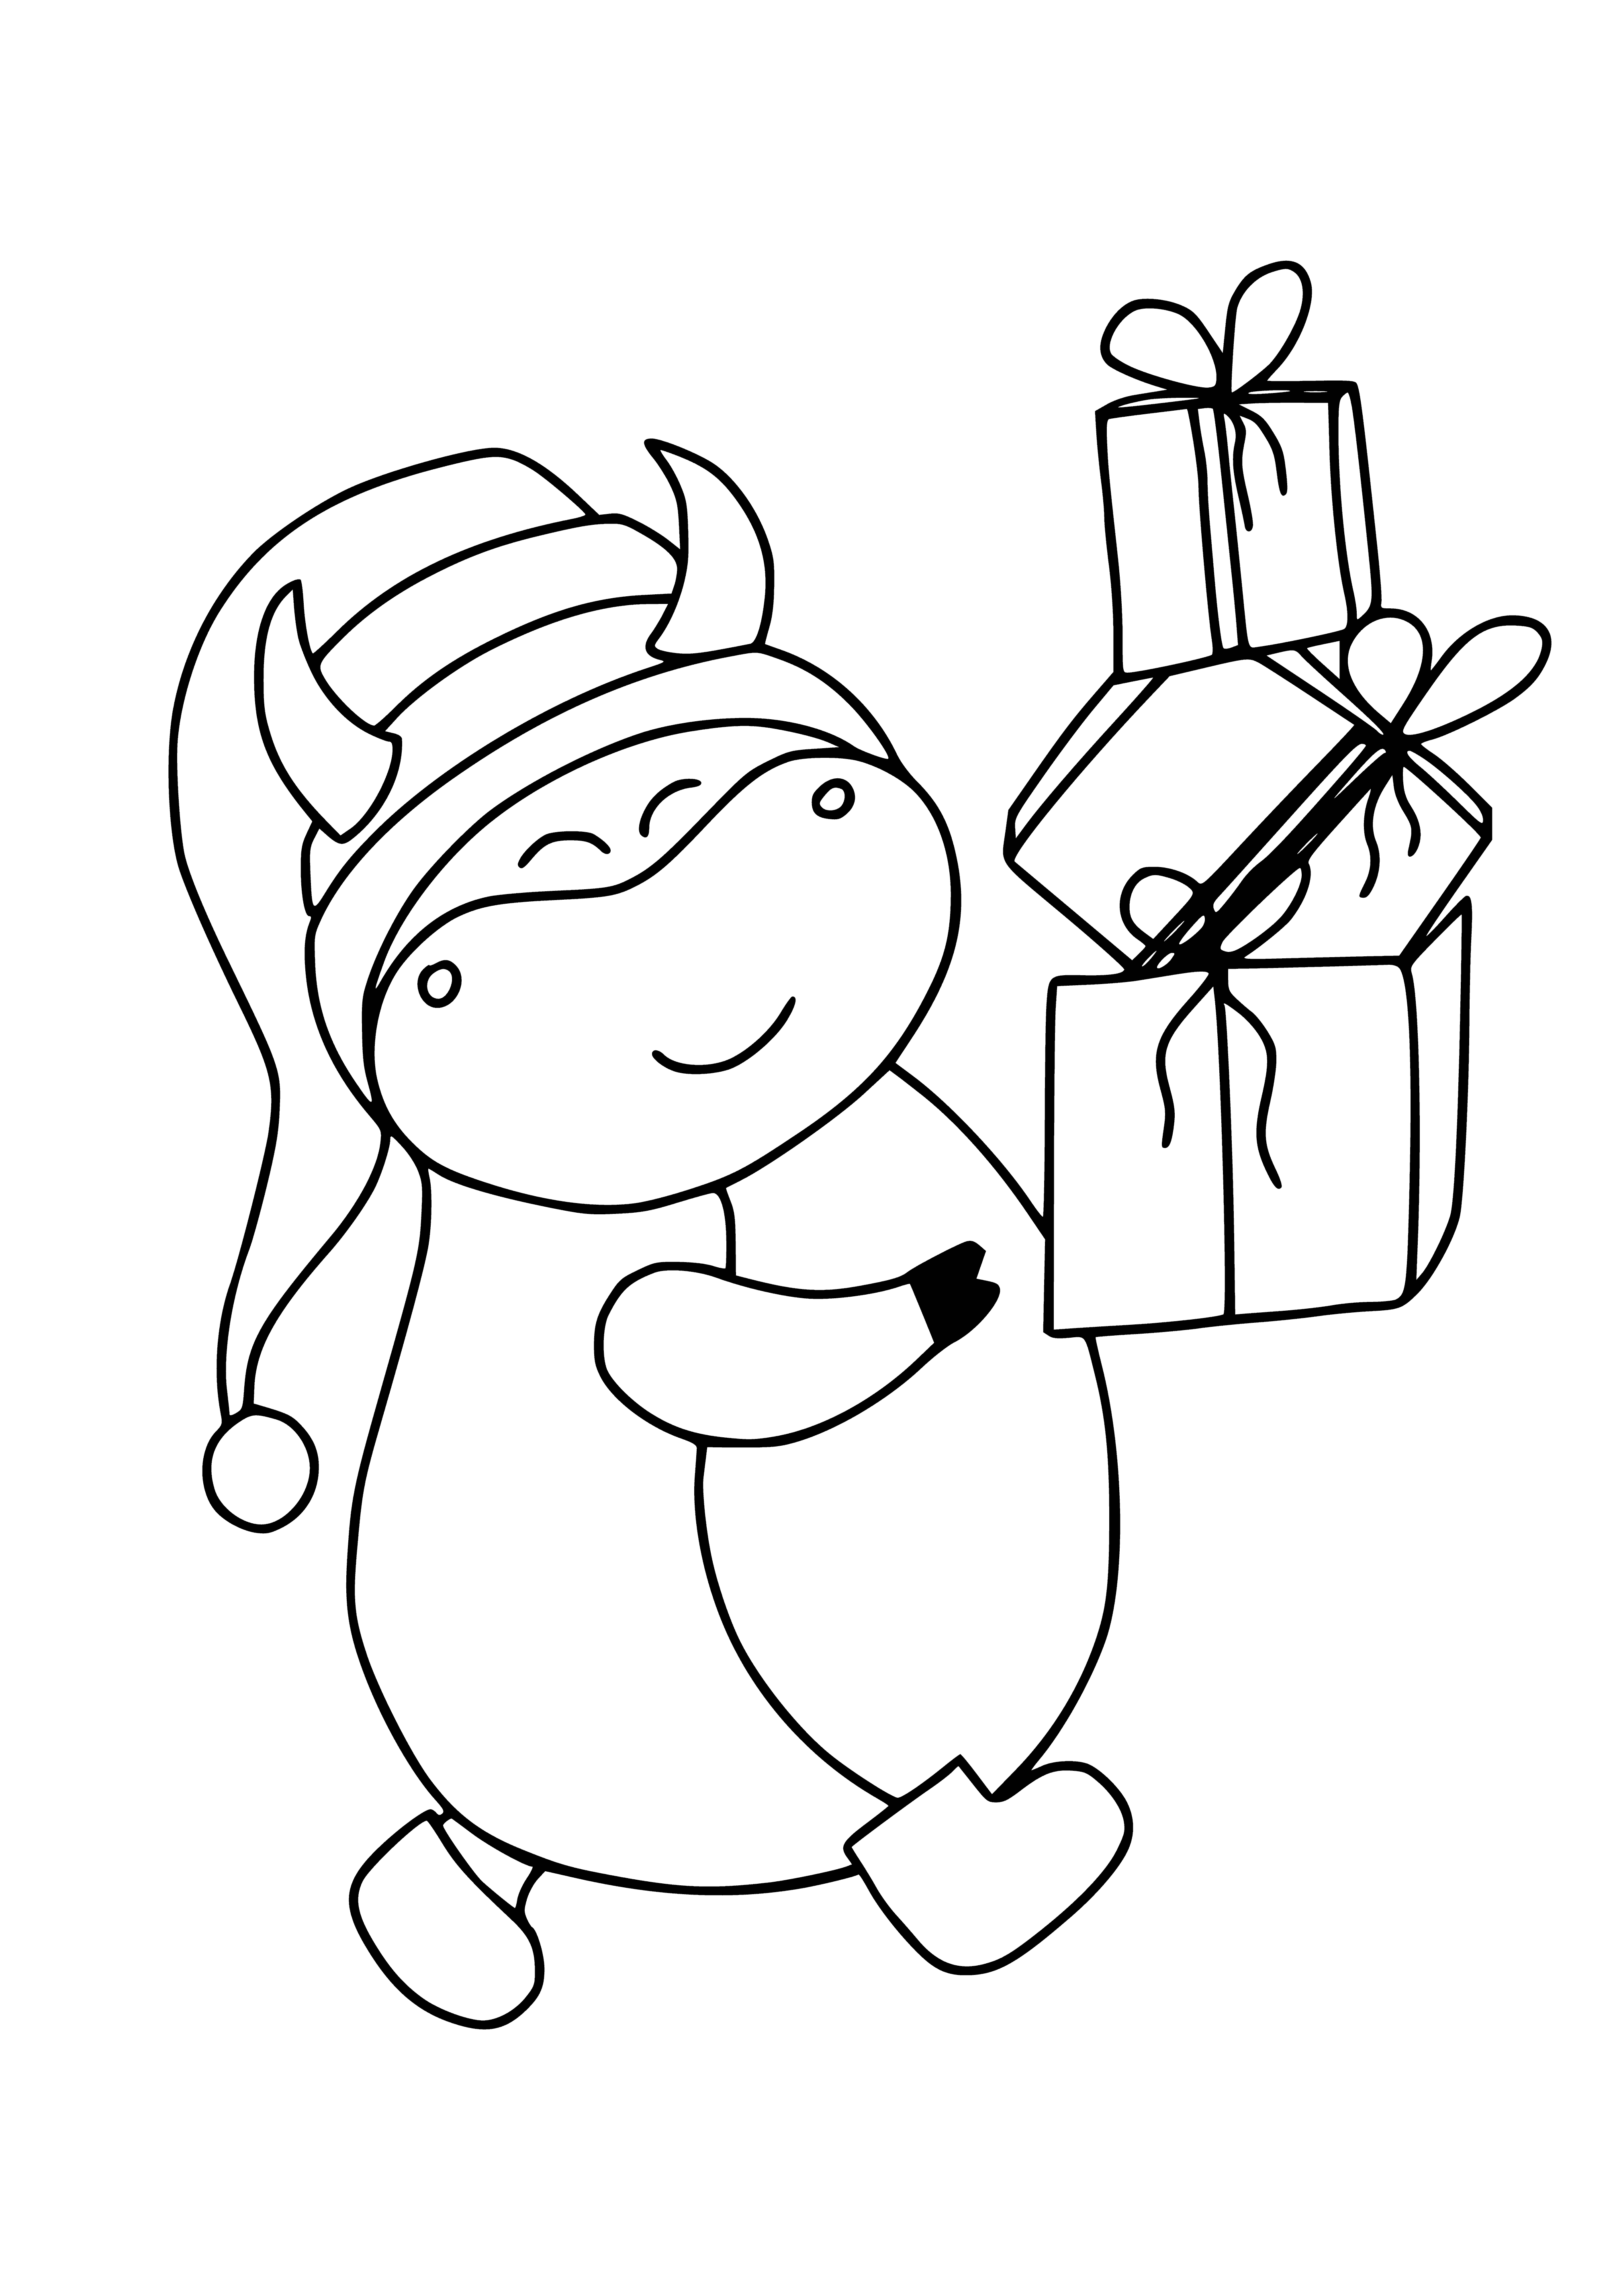 coloring page: A content bull stands on a grassy field, surrounded by a red ball, green wreath, & white envelope - its coat black & white, with a long curved horn.